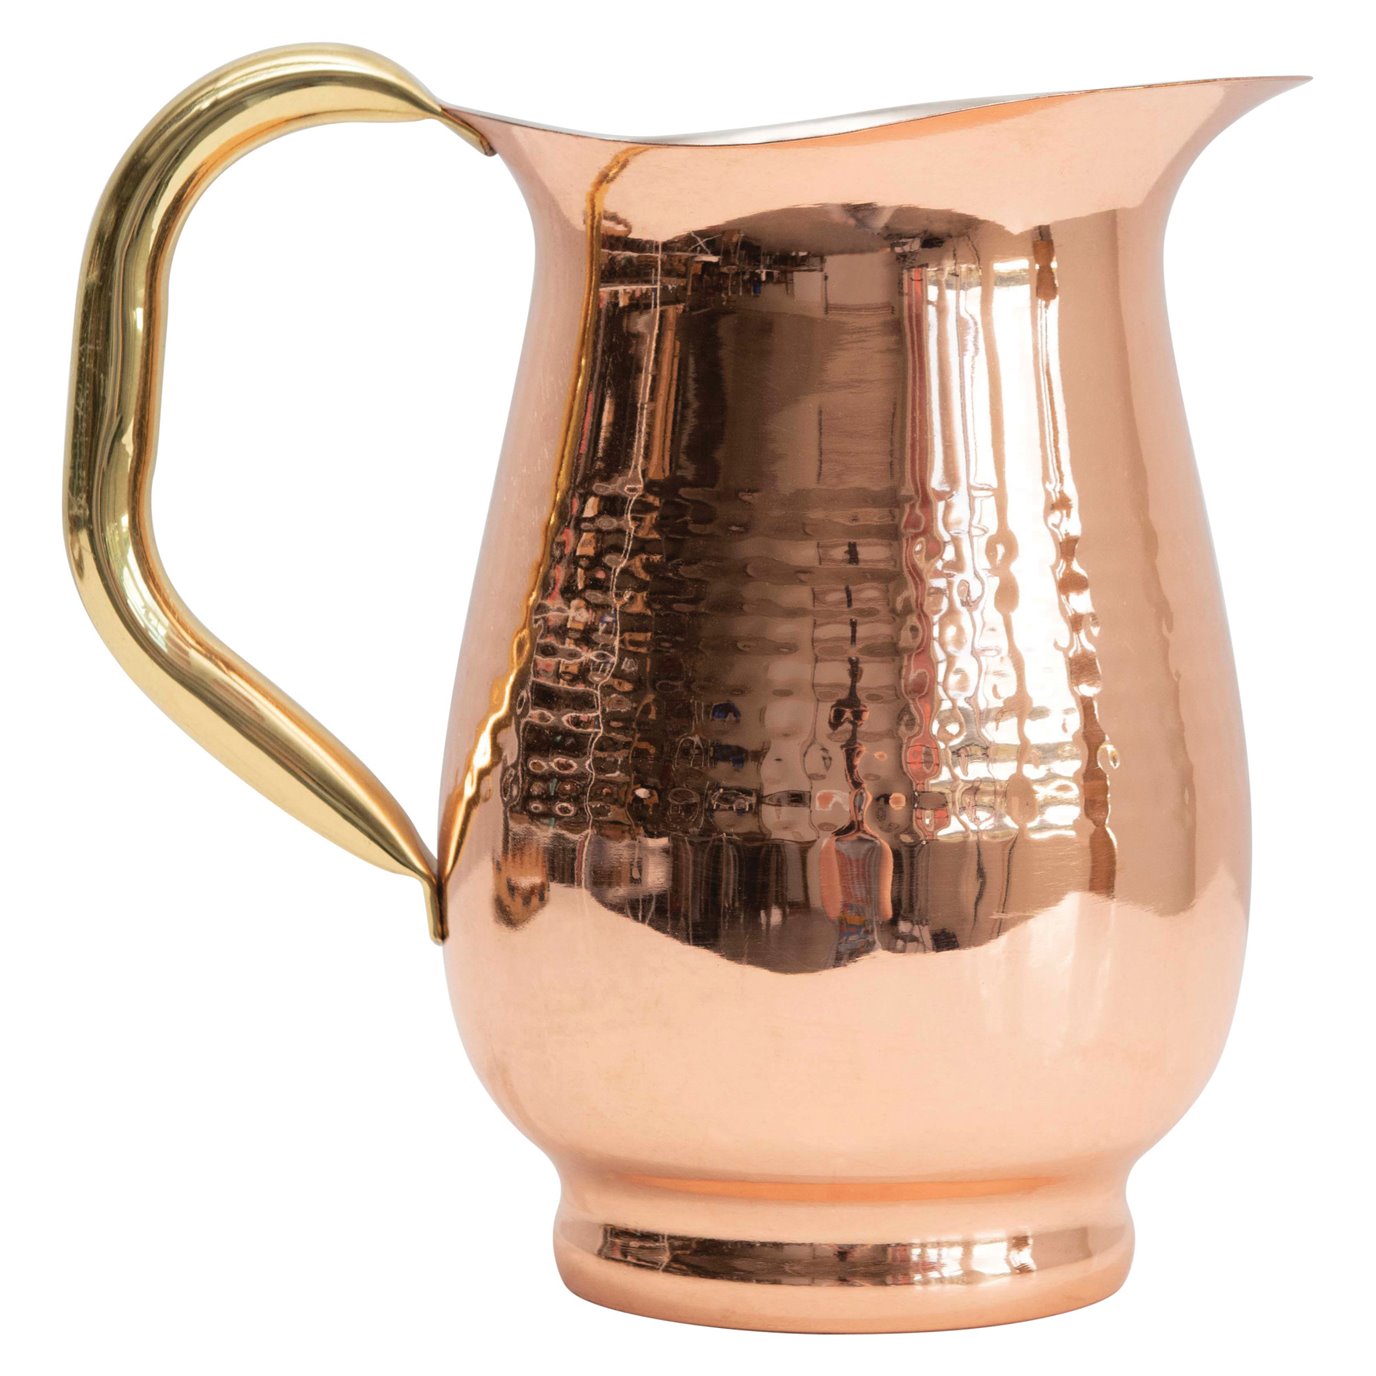 42 oz. Hammered Stainless Steel Pitcher